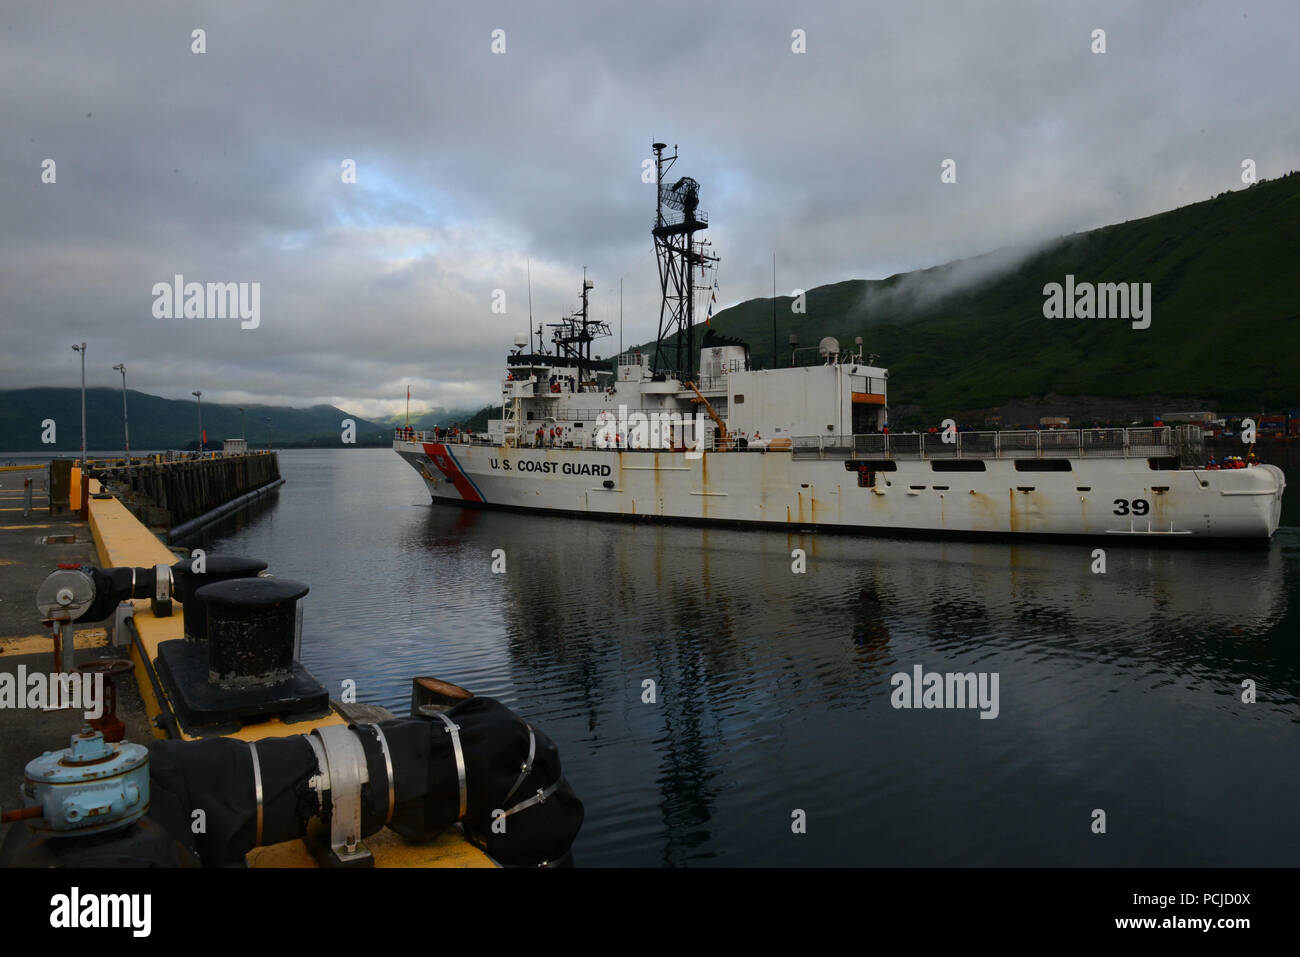 The Coast Guard Cutter Alex Haley (WMEC 39) returns to its homeport in Kodiak, Alaska, August 1, 2018. The crew members completed a 90-day deployment, patrolling more than 16,000 miles throughout the Pacific Ocean. U.S. Coast Guard photo by Petty Officer 3rd Class Lauren Dean. Stock Photo